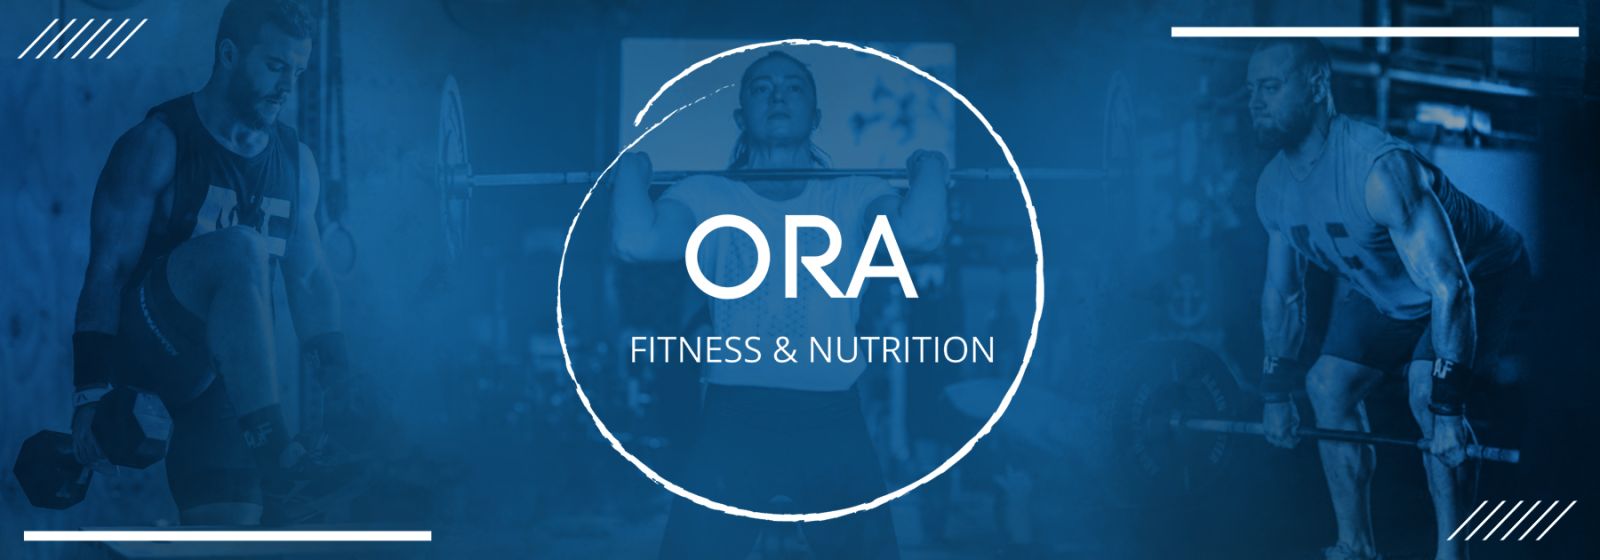 Ora Fitness and Nutrition - Again Faster Business Partners